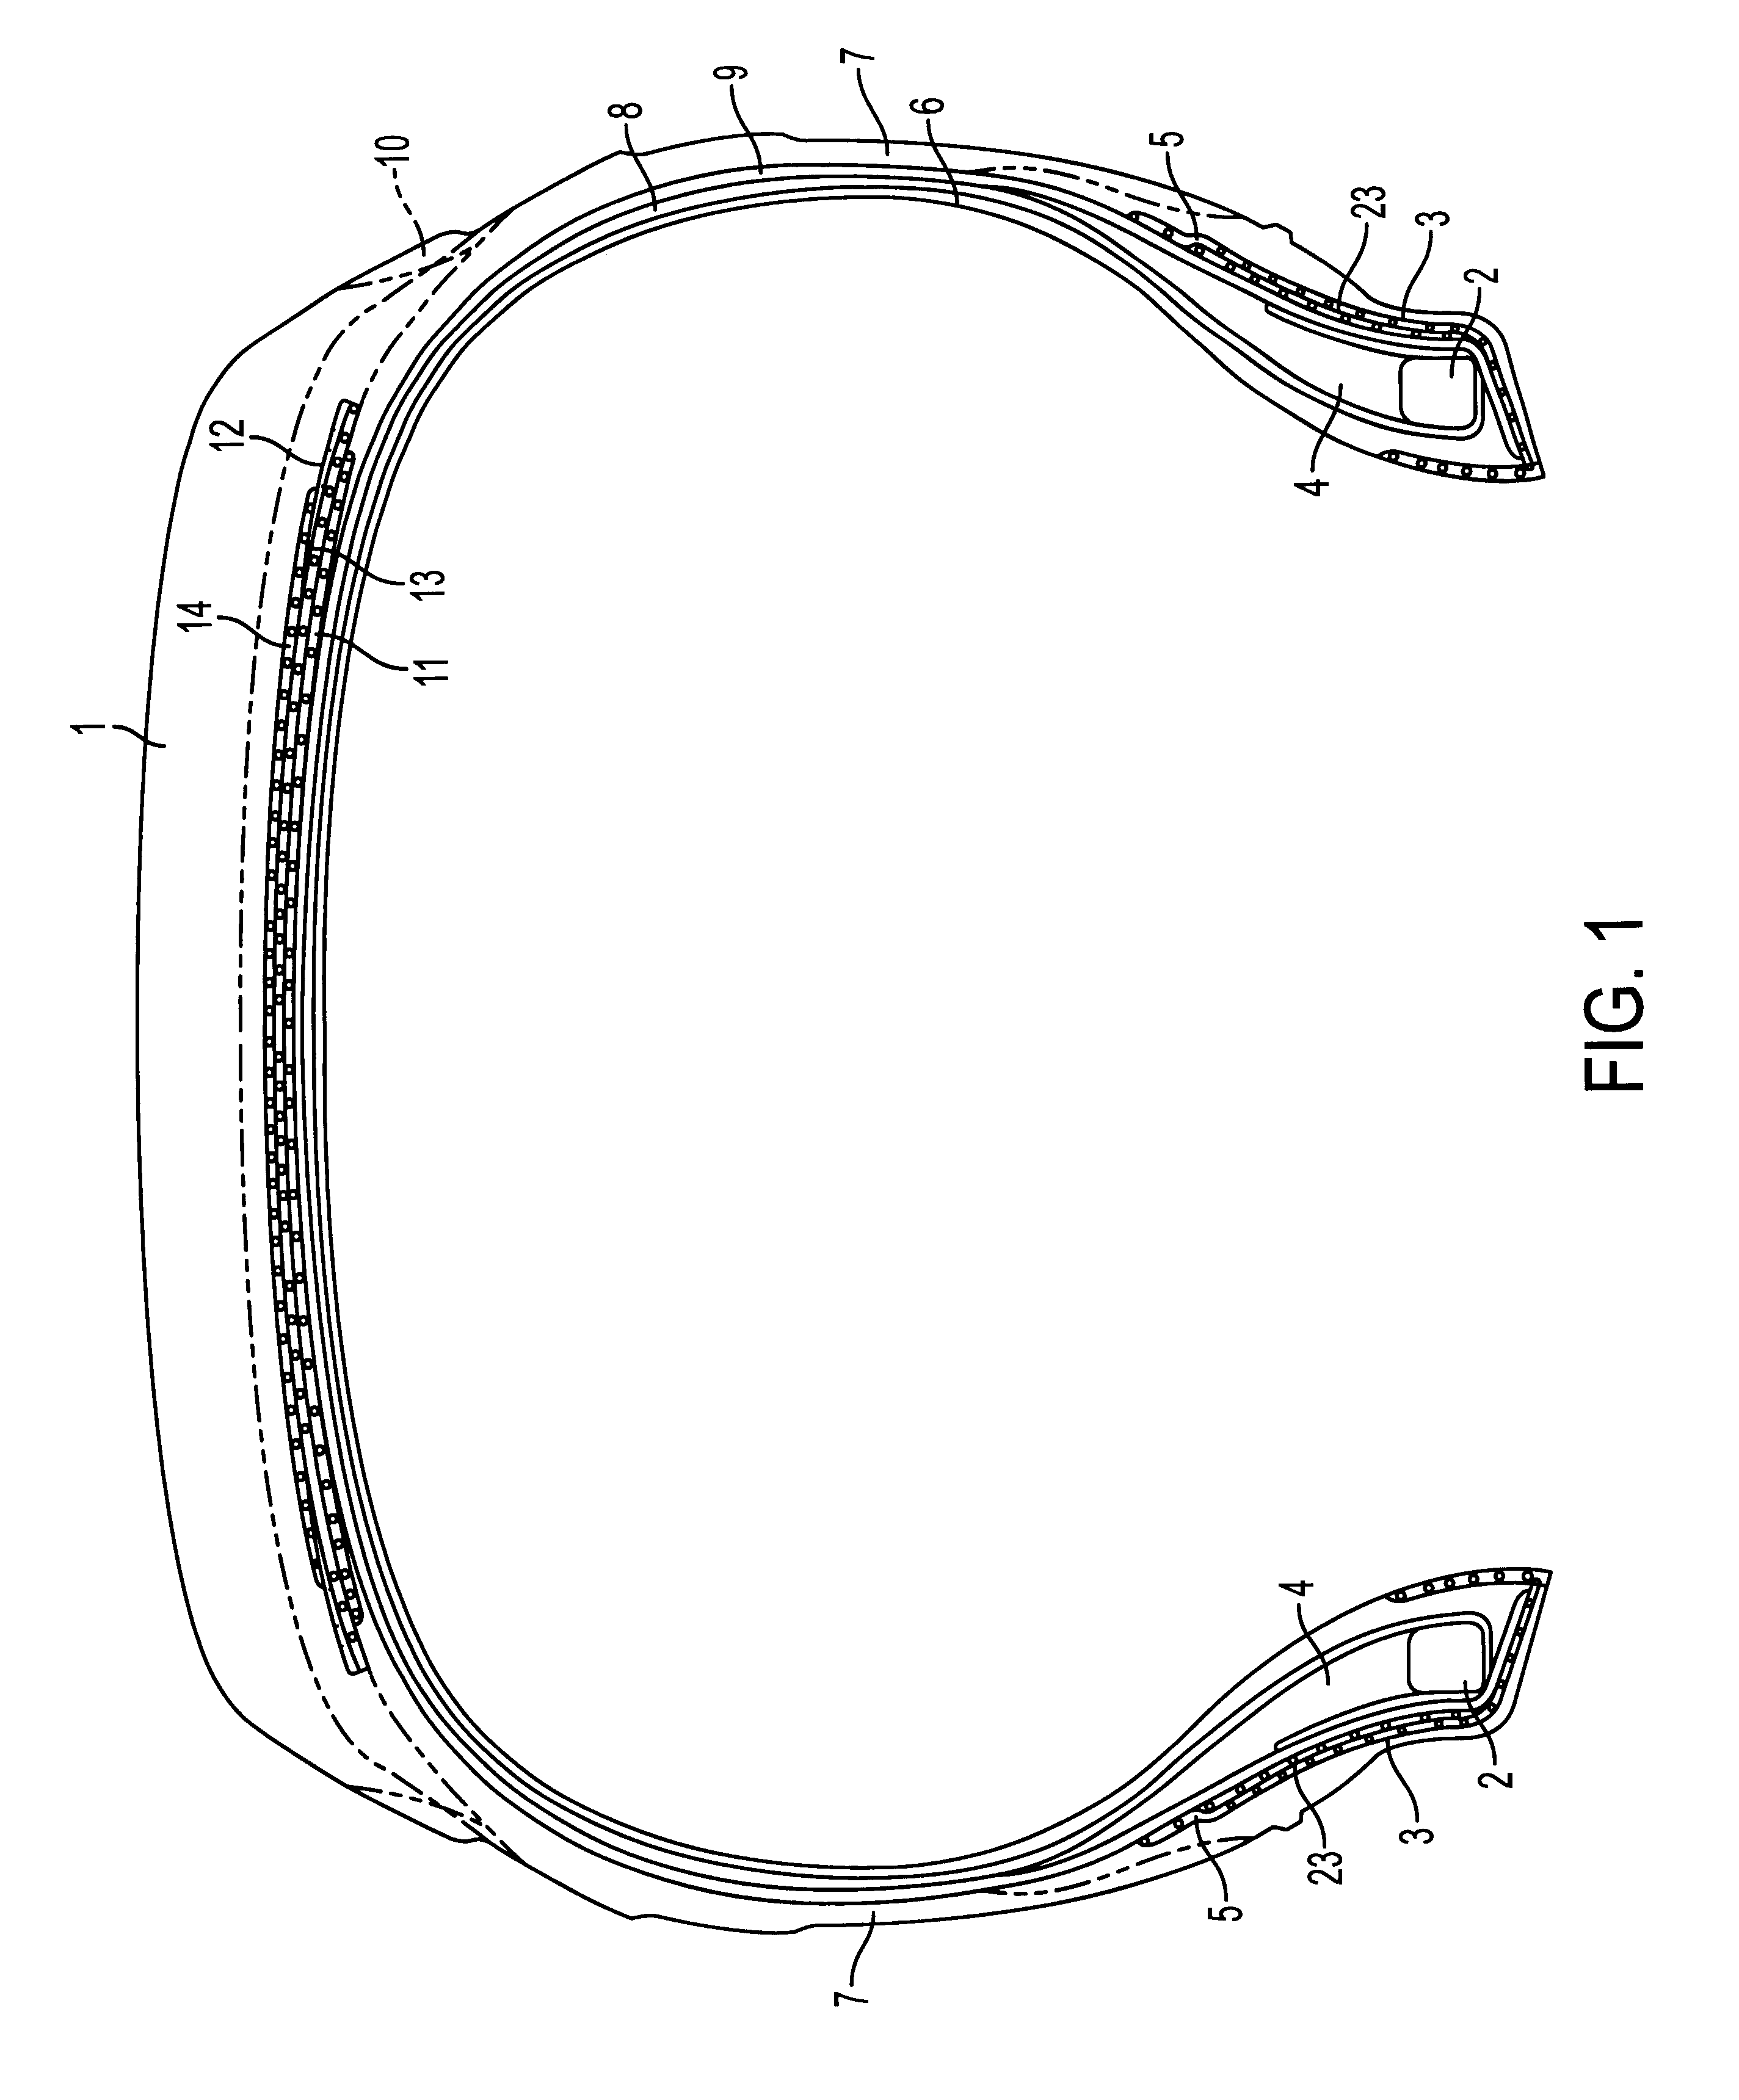 Vehicular tire having a carcass with sidewalls and tread, process of making vehicle tire, and process of masking an overlapping portion of carcass ply needs